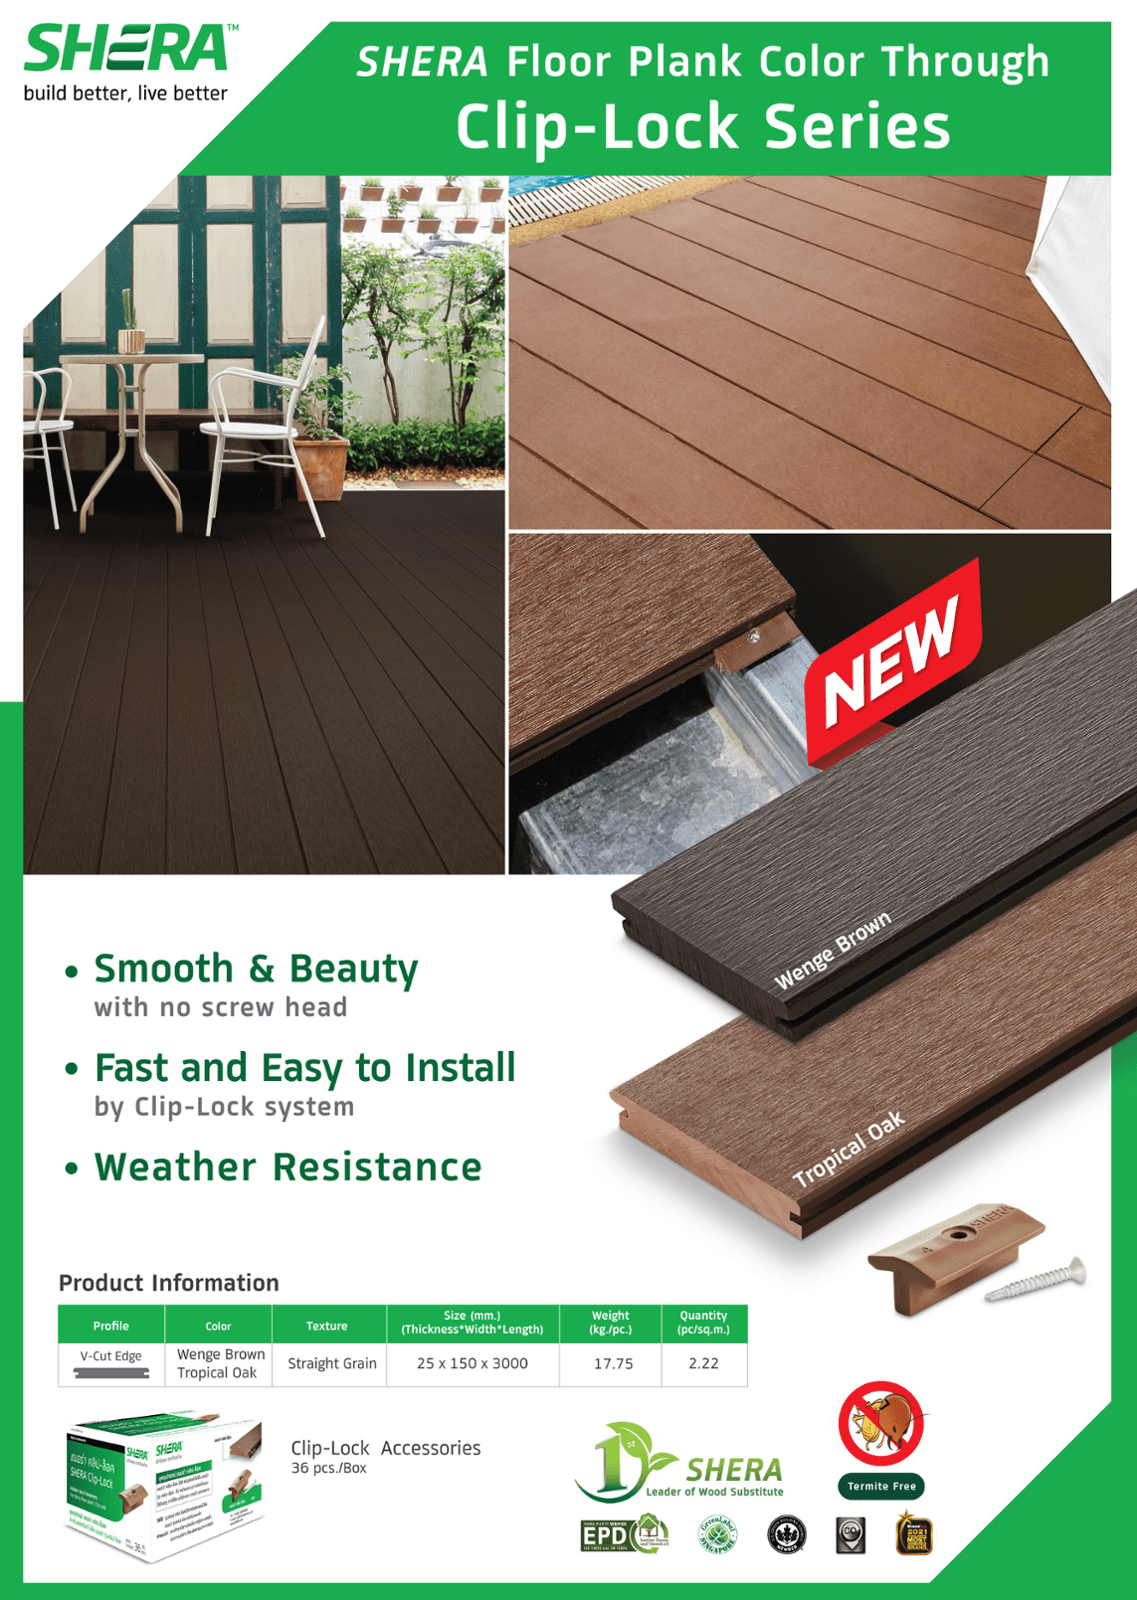 SHERA Clip Lock fire resistant decking now comes in colour through colours